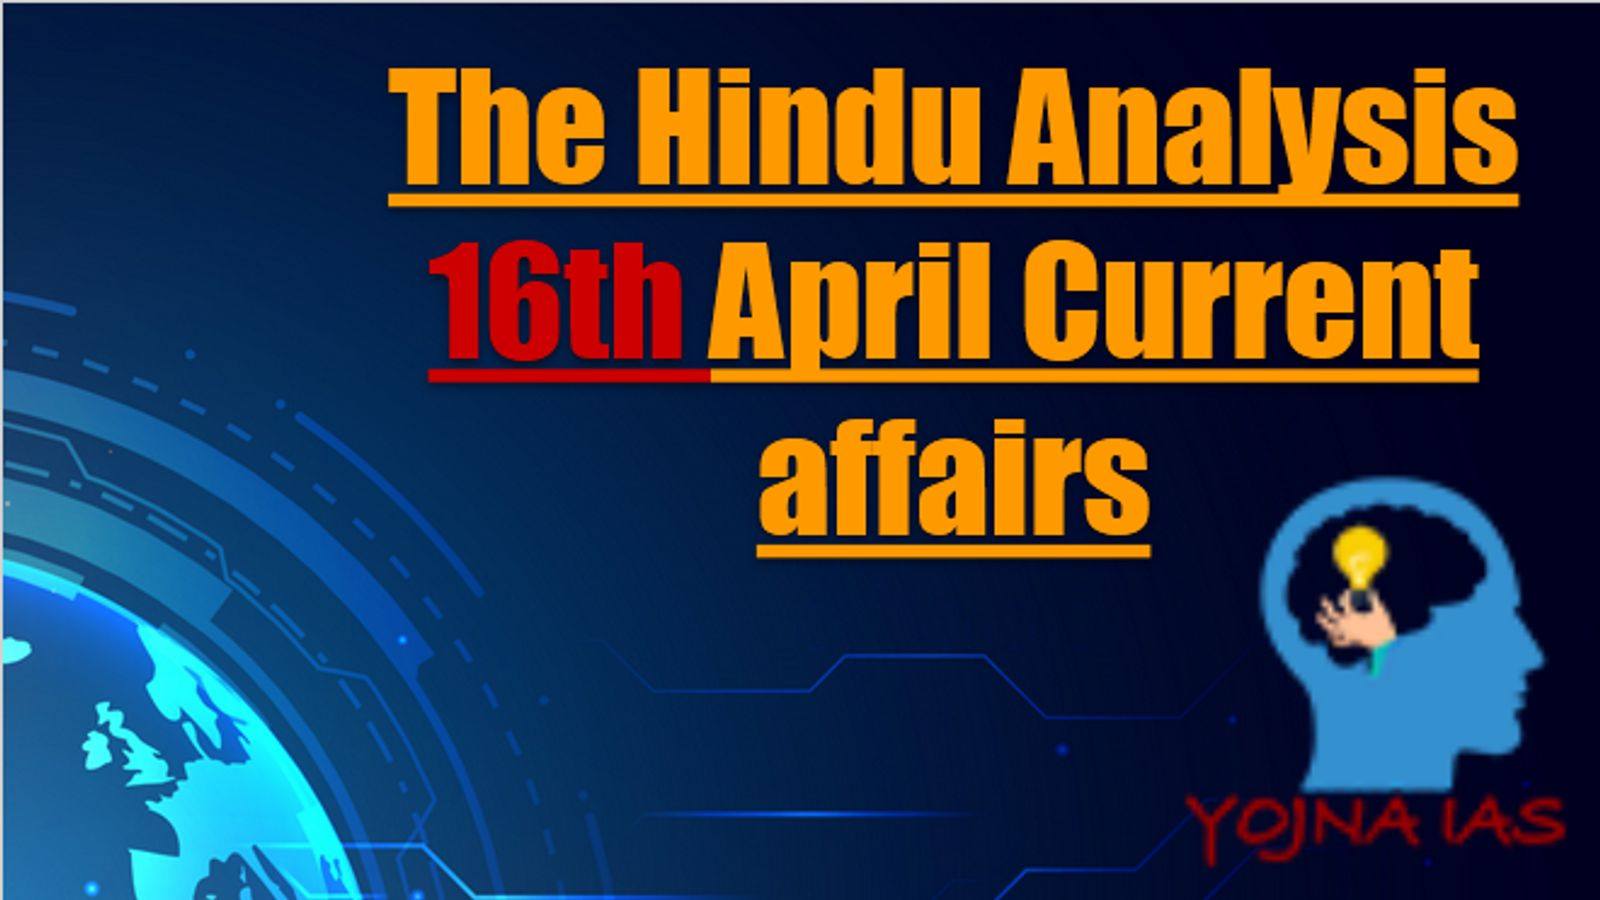 Today Current Affairs 16th April